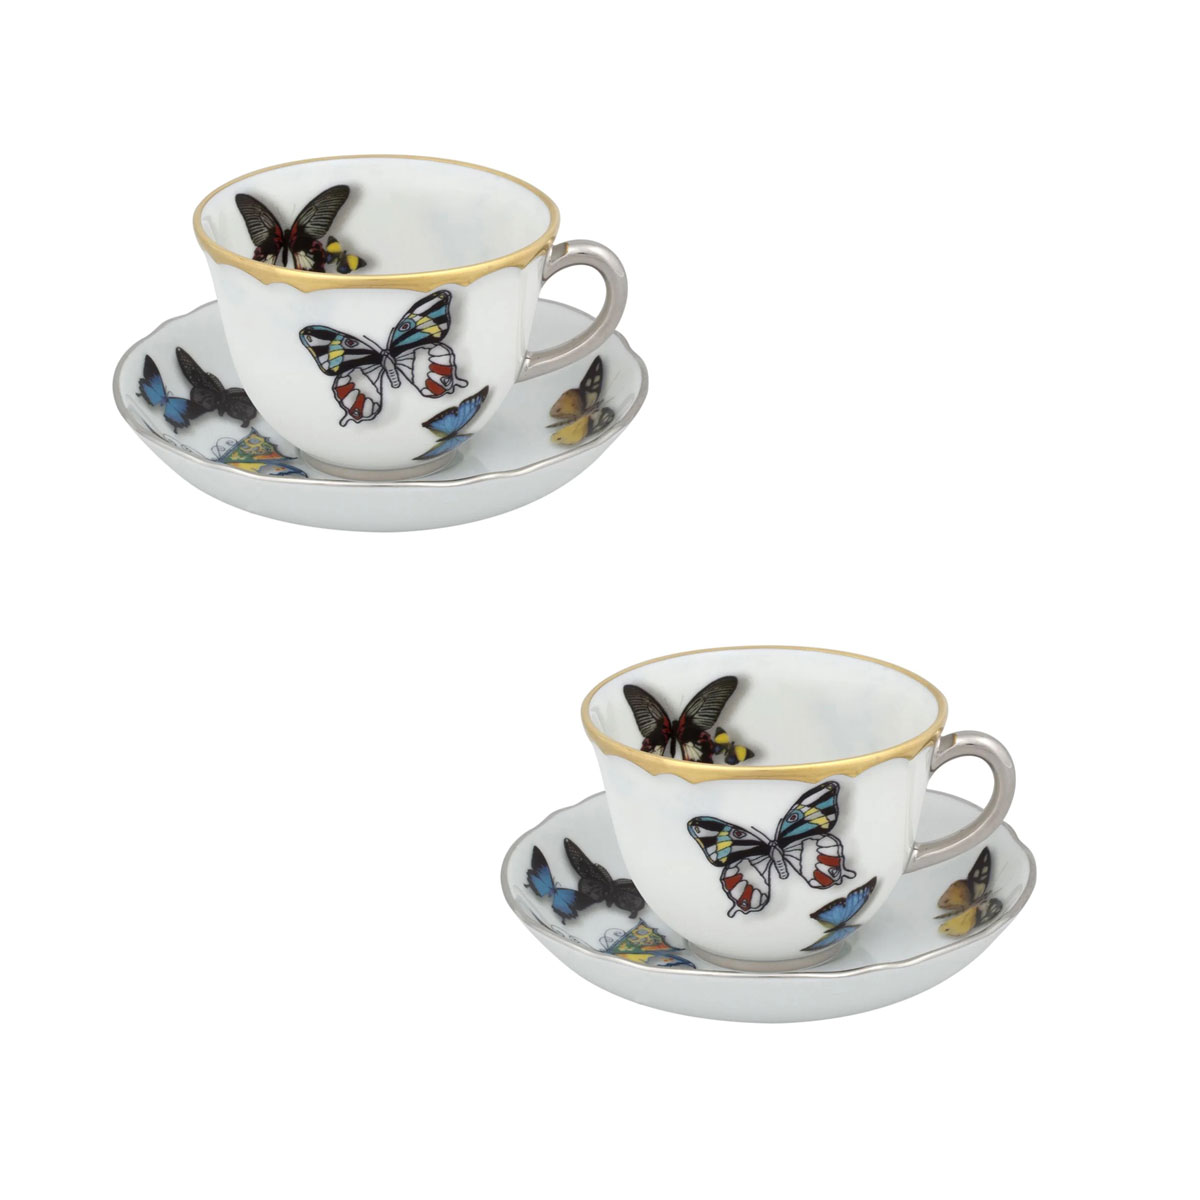 Vista Alegre Porcelain Christian Lacroix - Butterfly Parade Set 2 Coffee Cups and Saucers